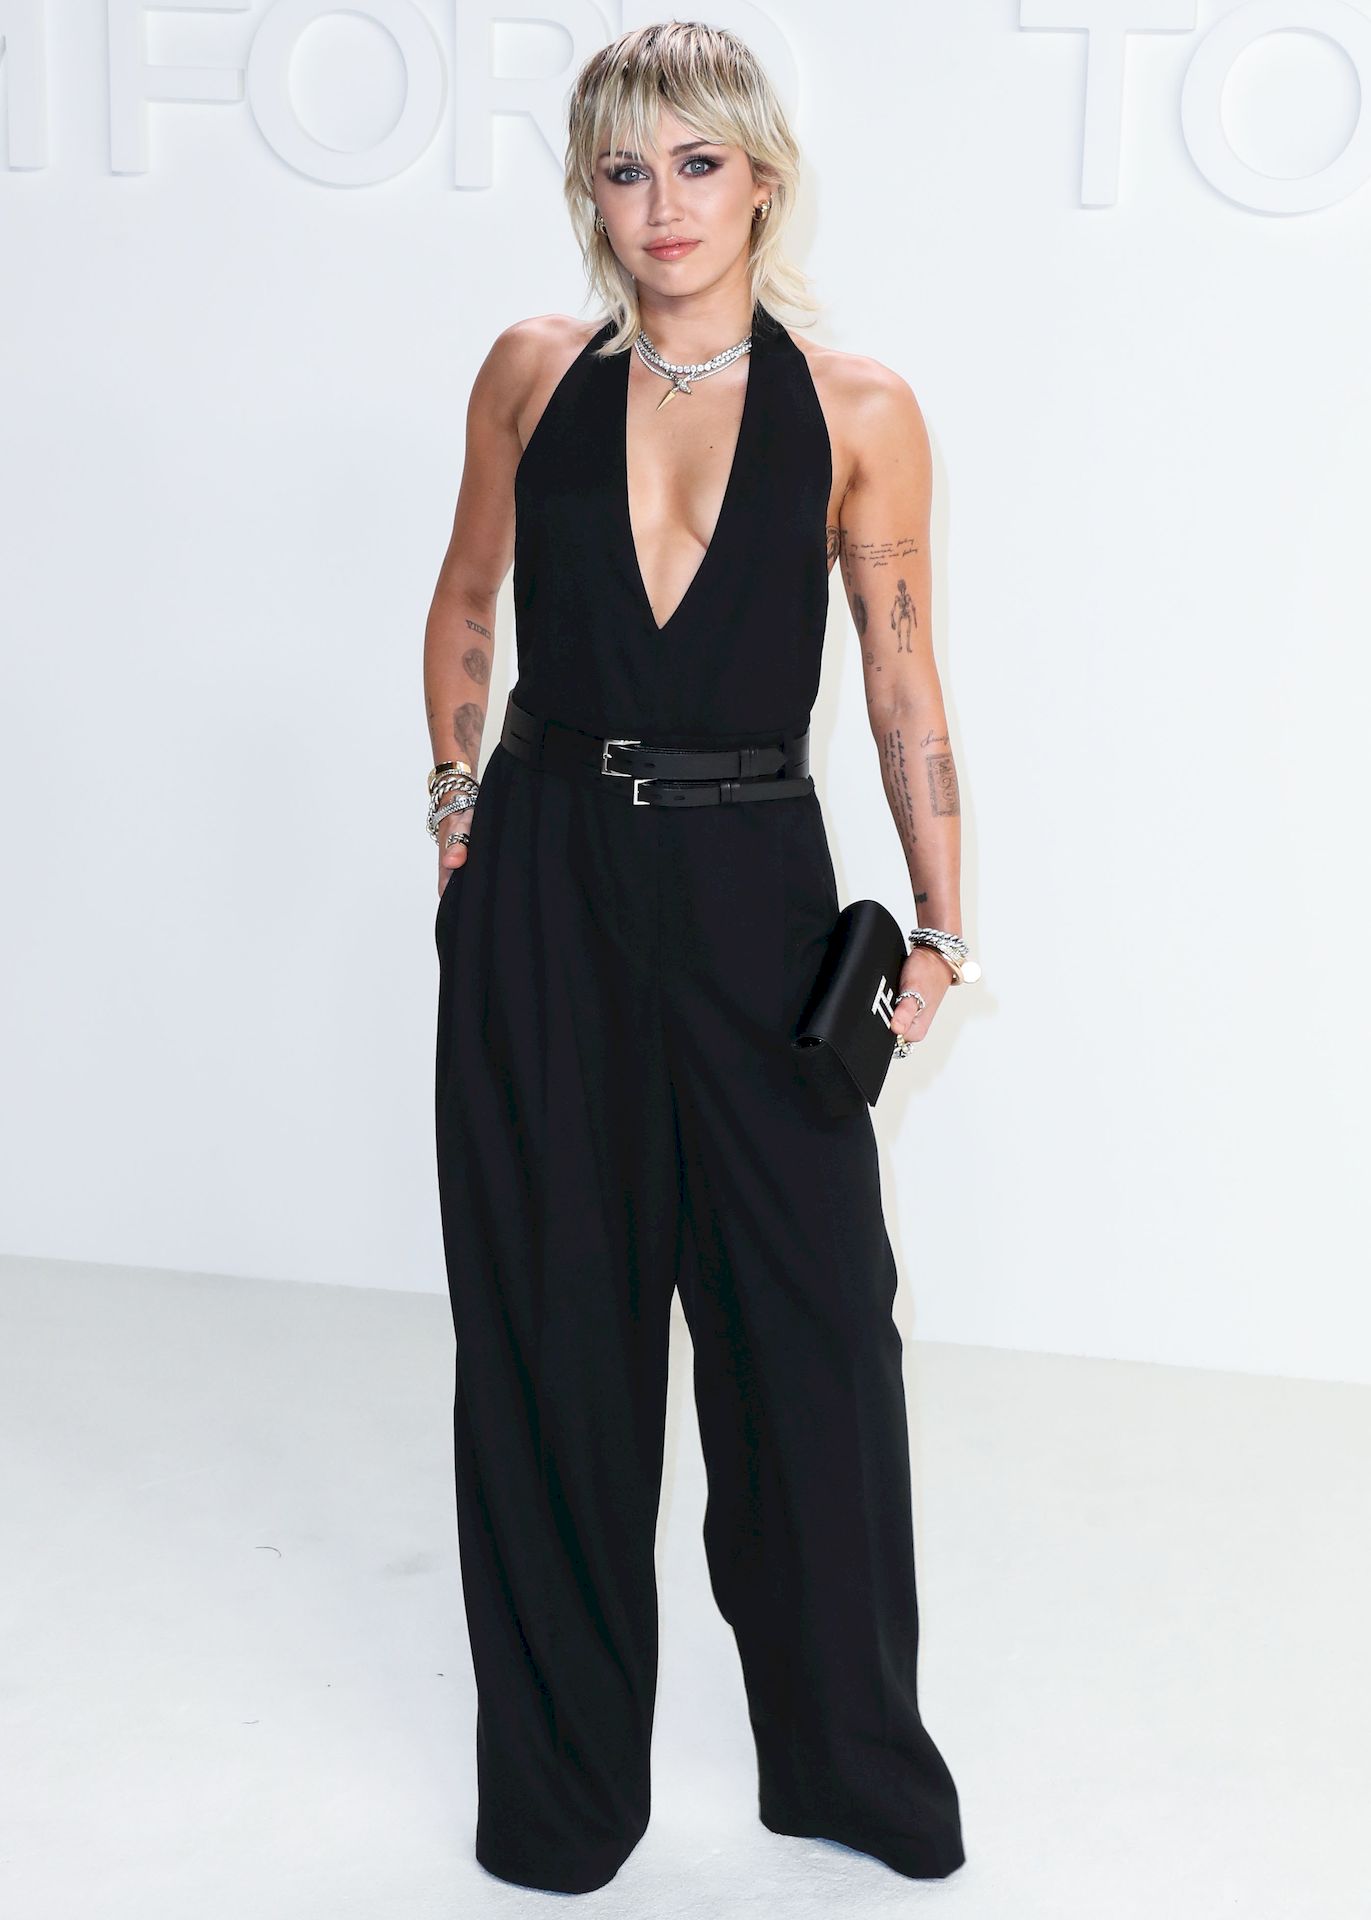 Miley-Cyrus-Looks-Sexy-at-the-Tom-Ford-Autumn_Winter-2020-Fashion-Show-0078.jpg